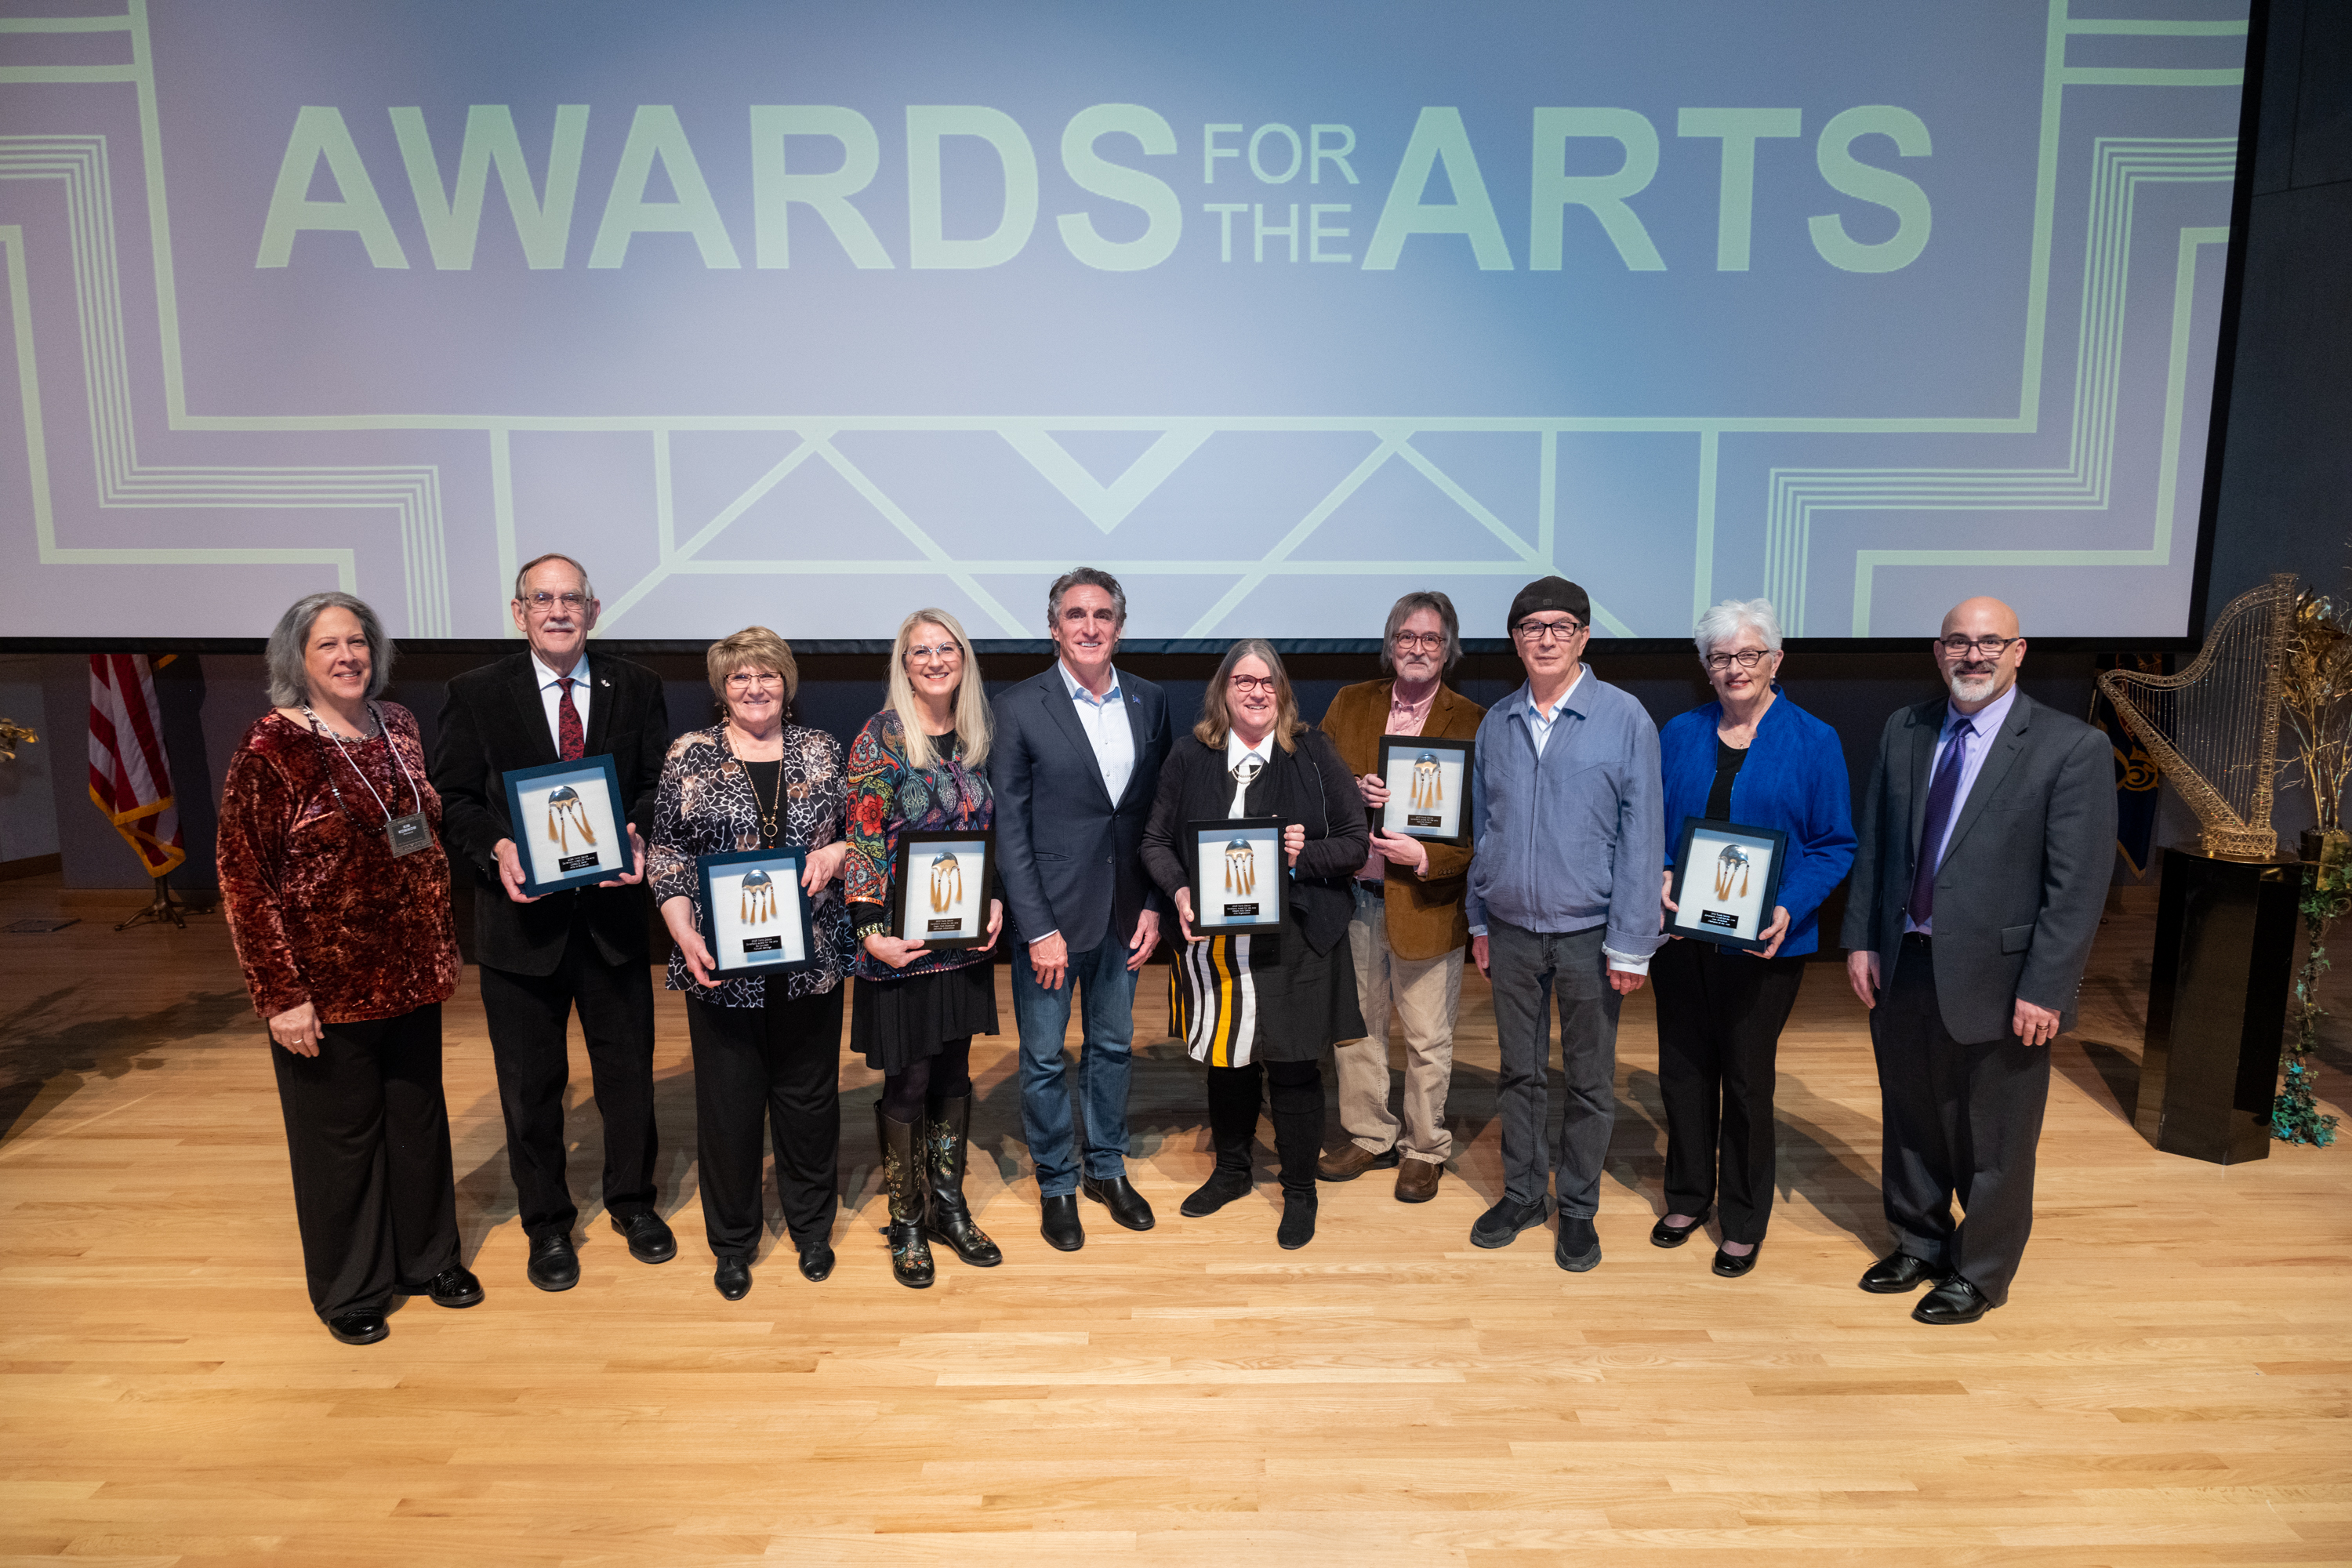 Ten adults standing on a hard wood floor, dressed business casual, holding six large black-framed awards with a large projected screen in the background that reads AWARDS FOR THE ARTS. 